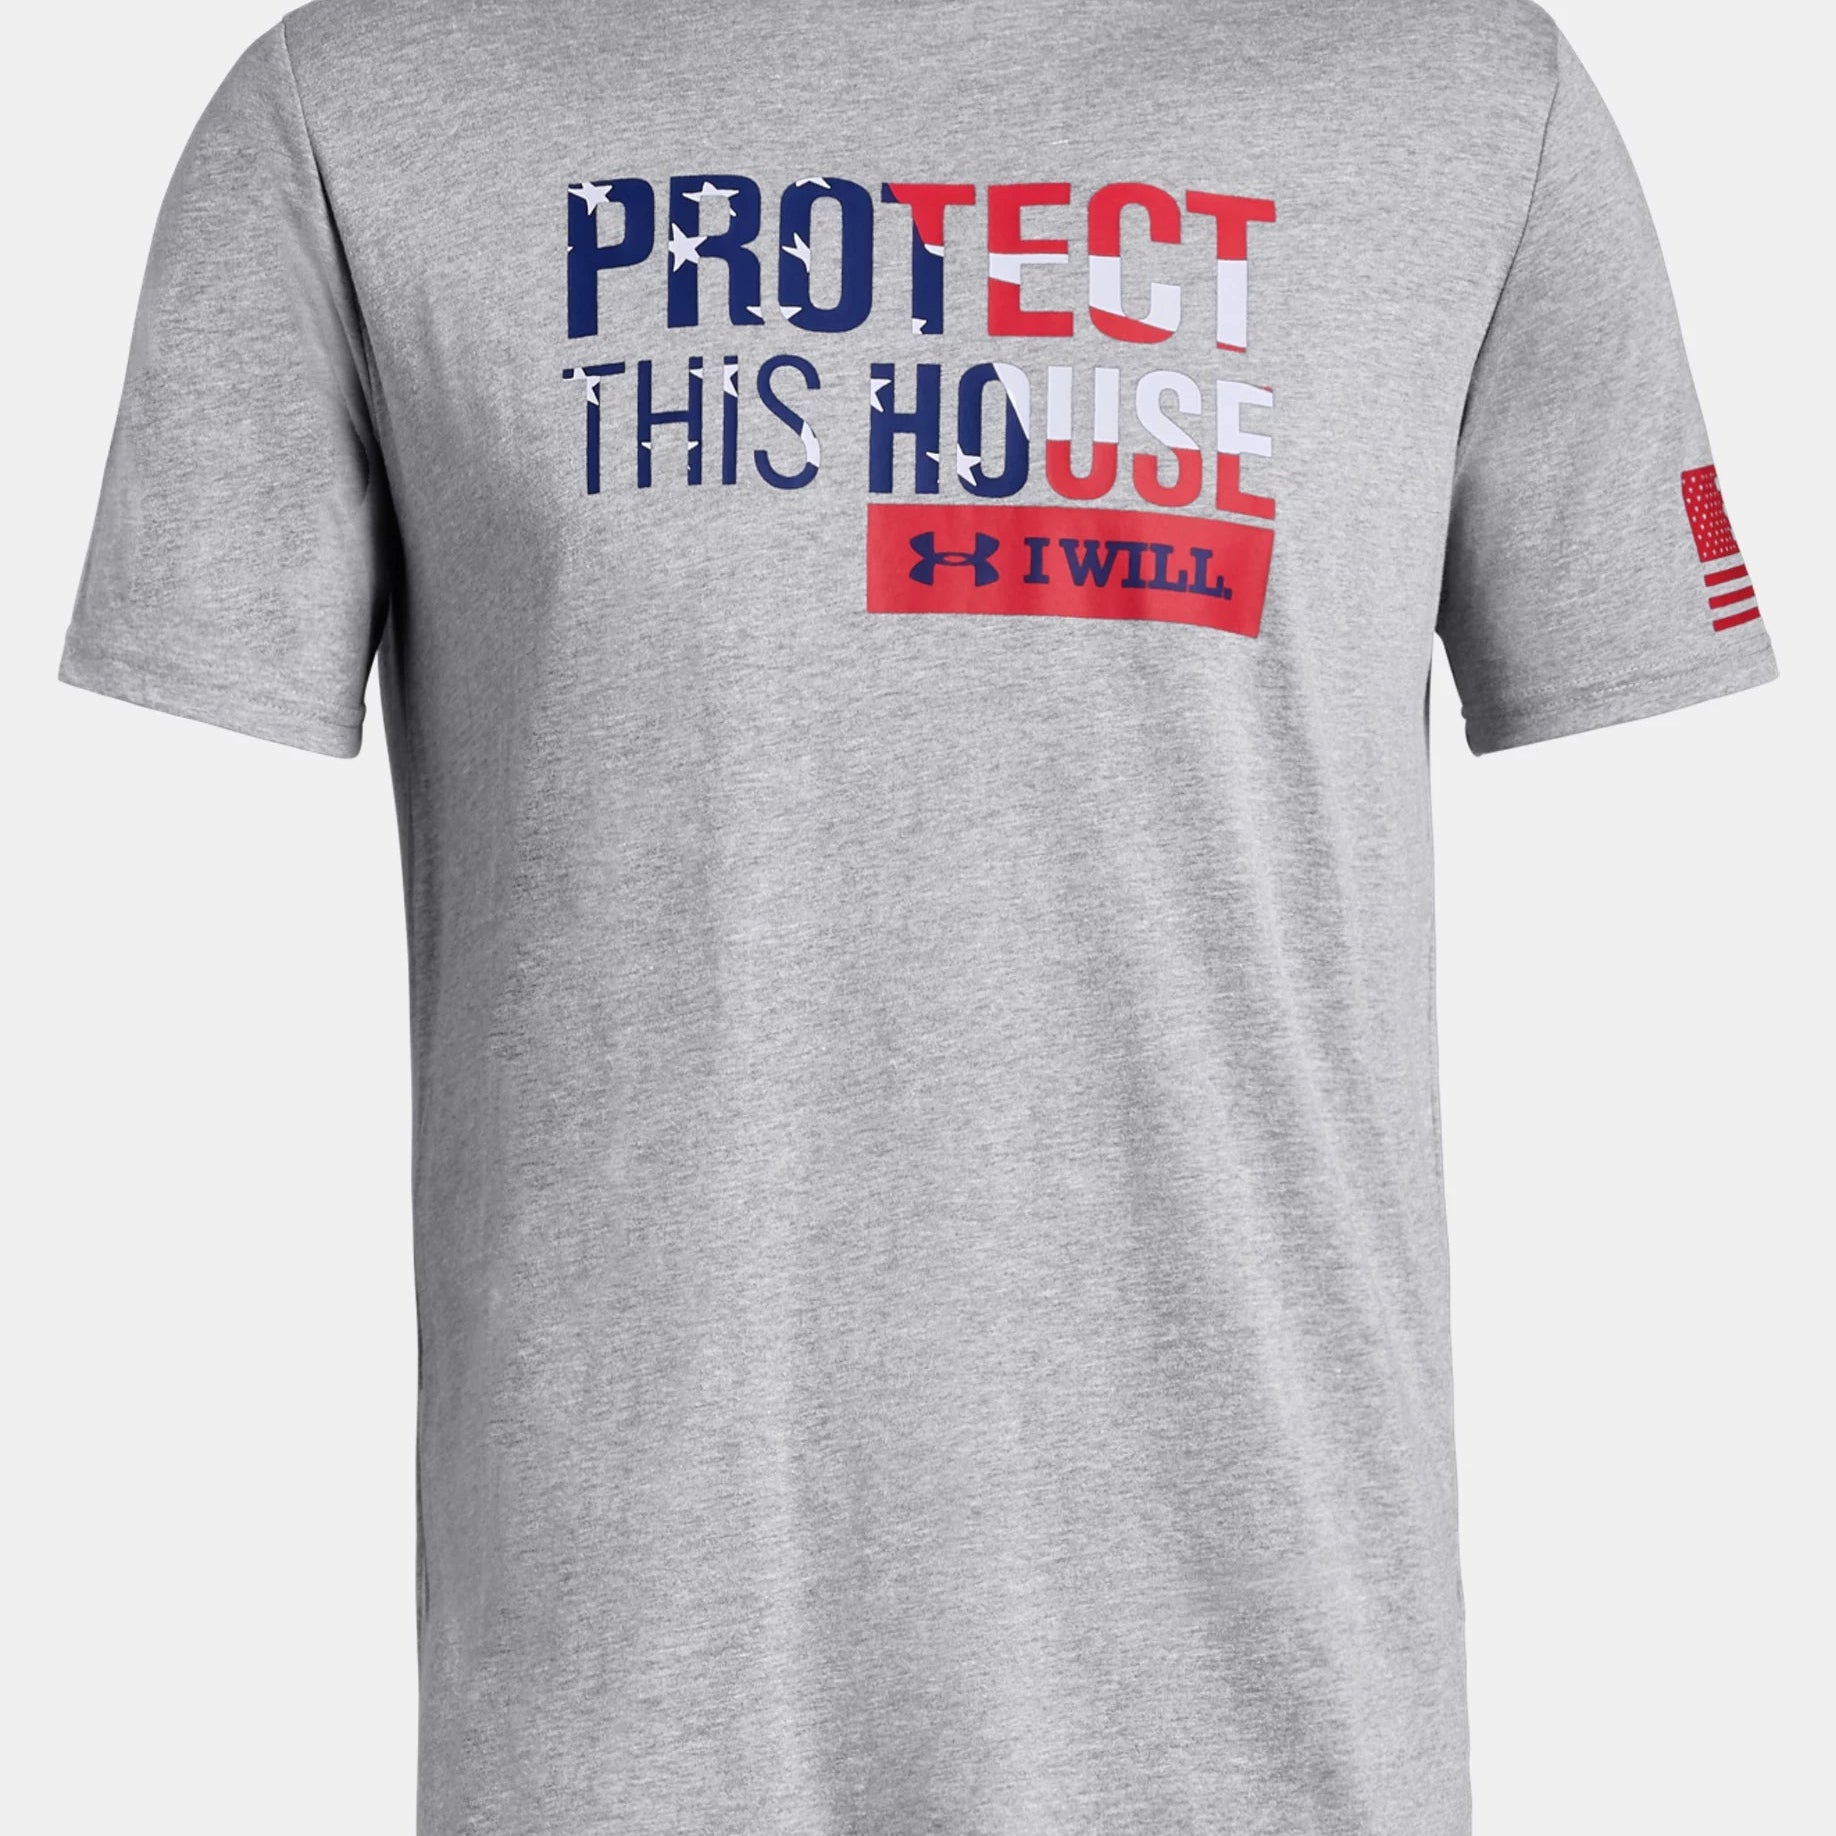 UA Freedom Protect This House Tee T-Shirt Under Armour Grey Small 